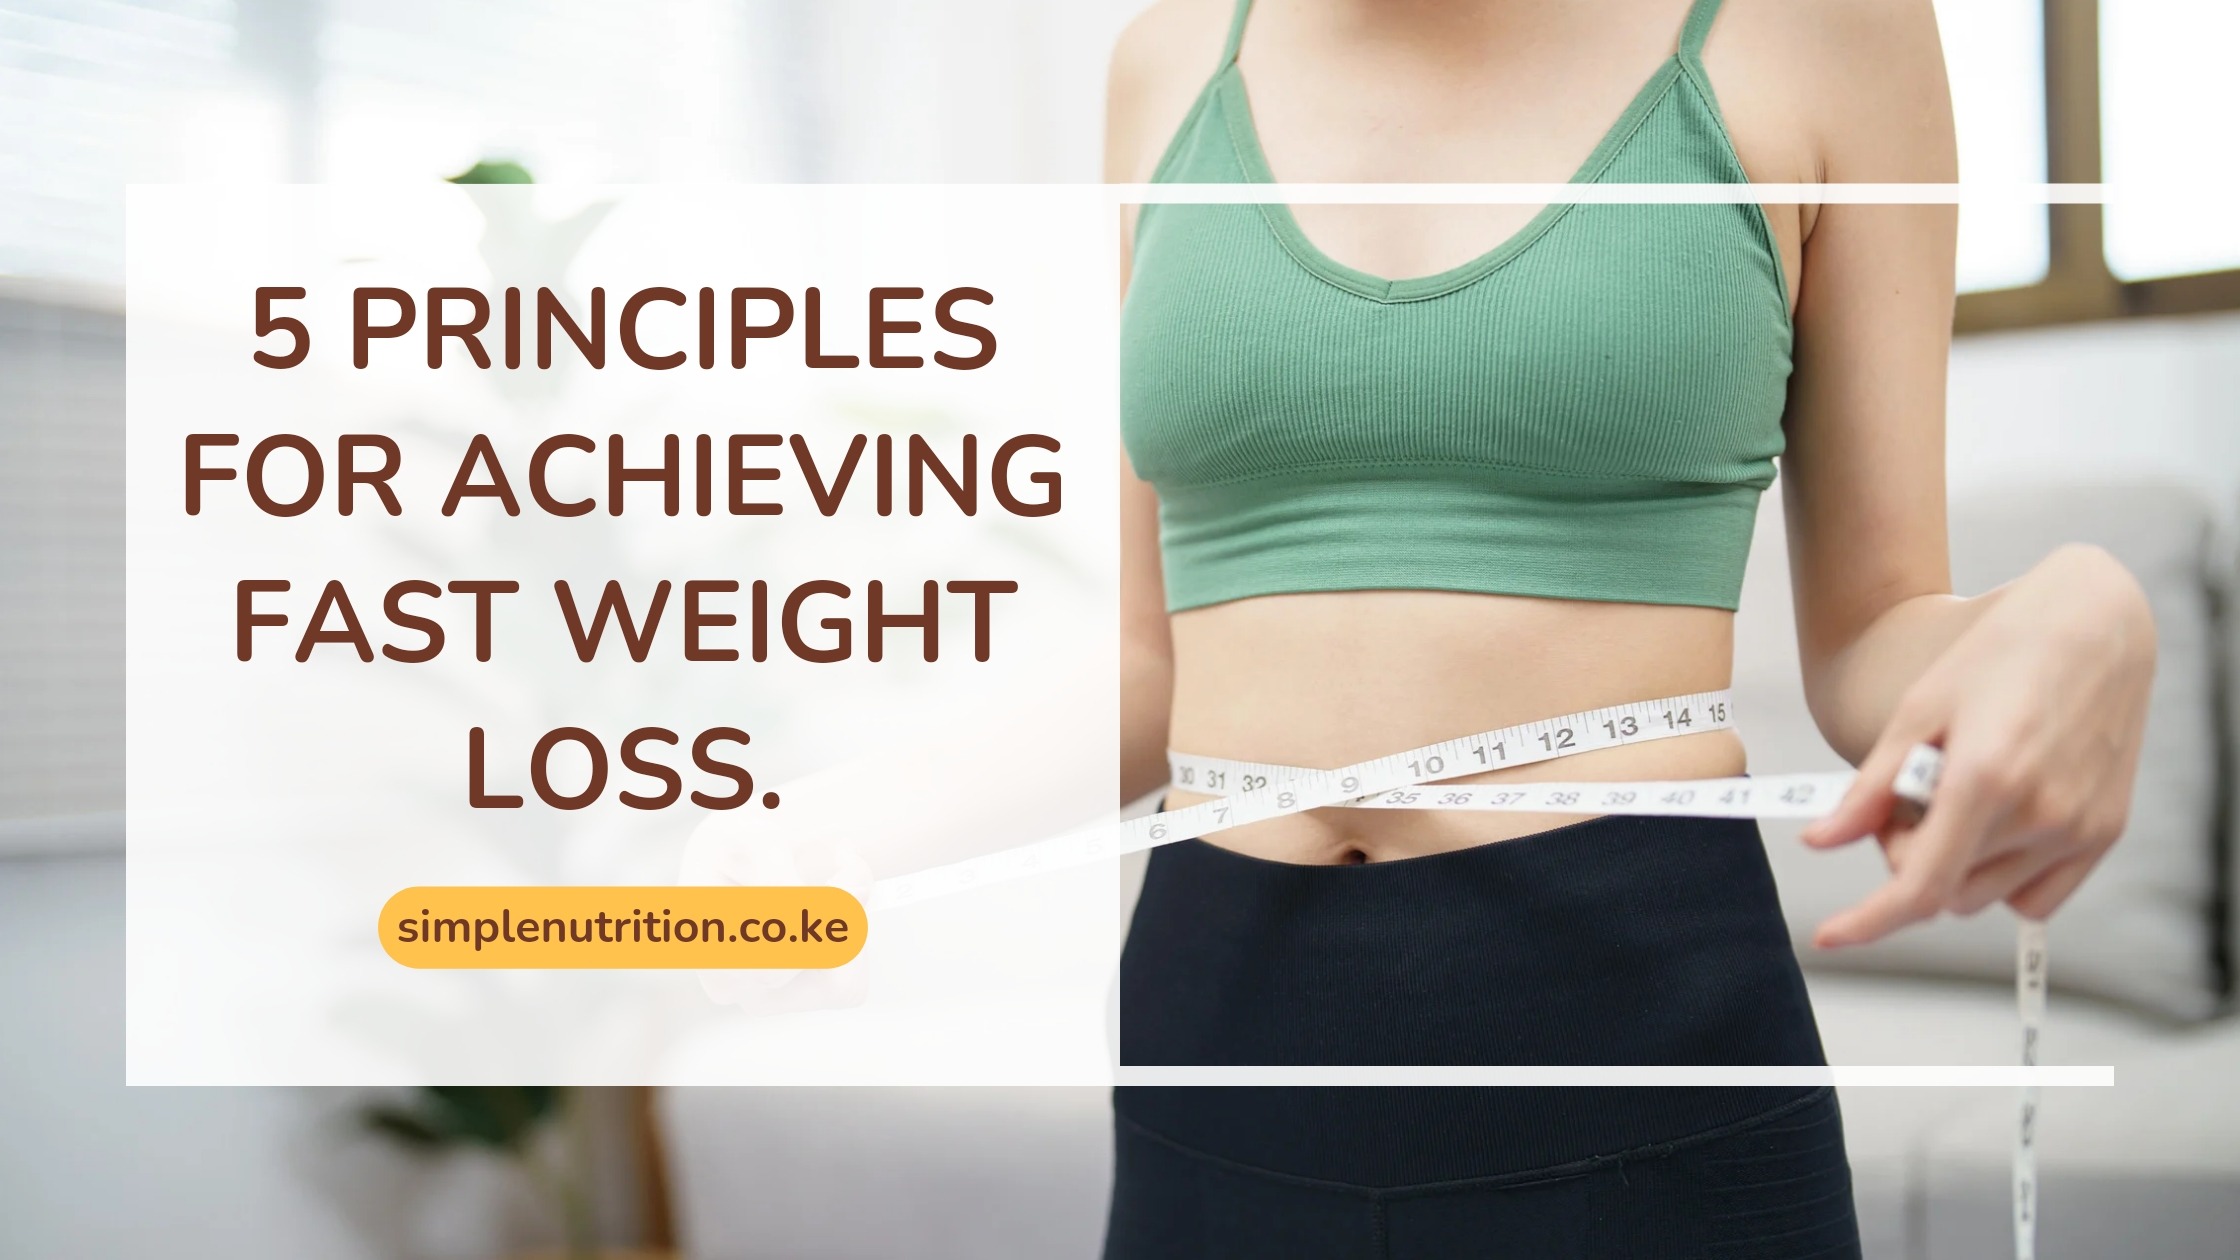 How to Achieve a Fast Weight Loss. (5 Principles)